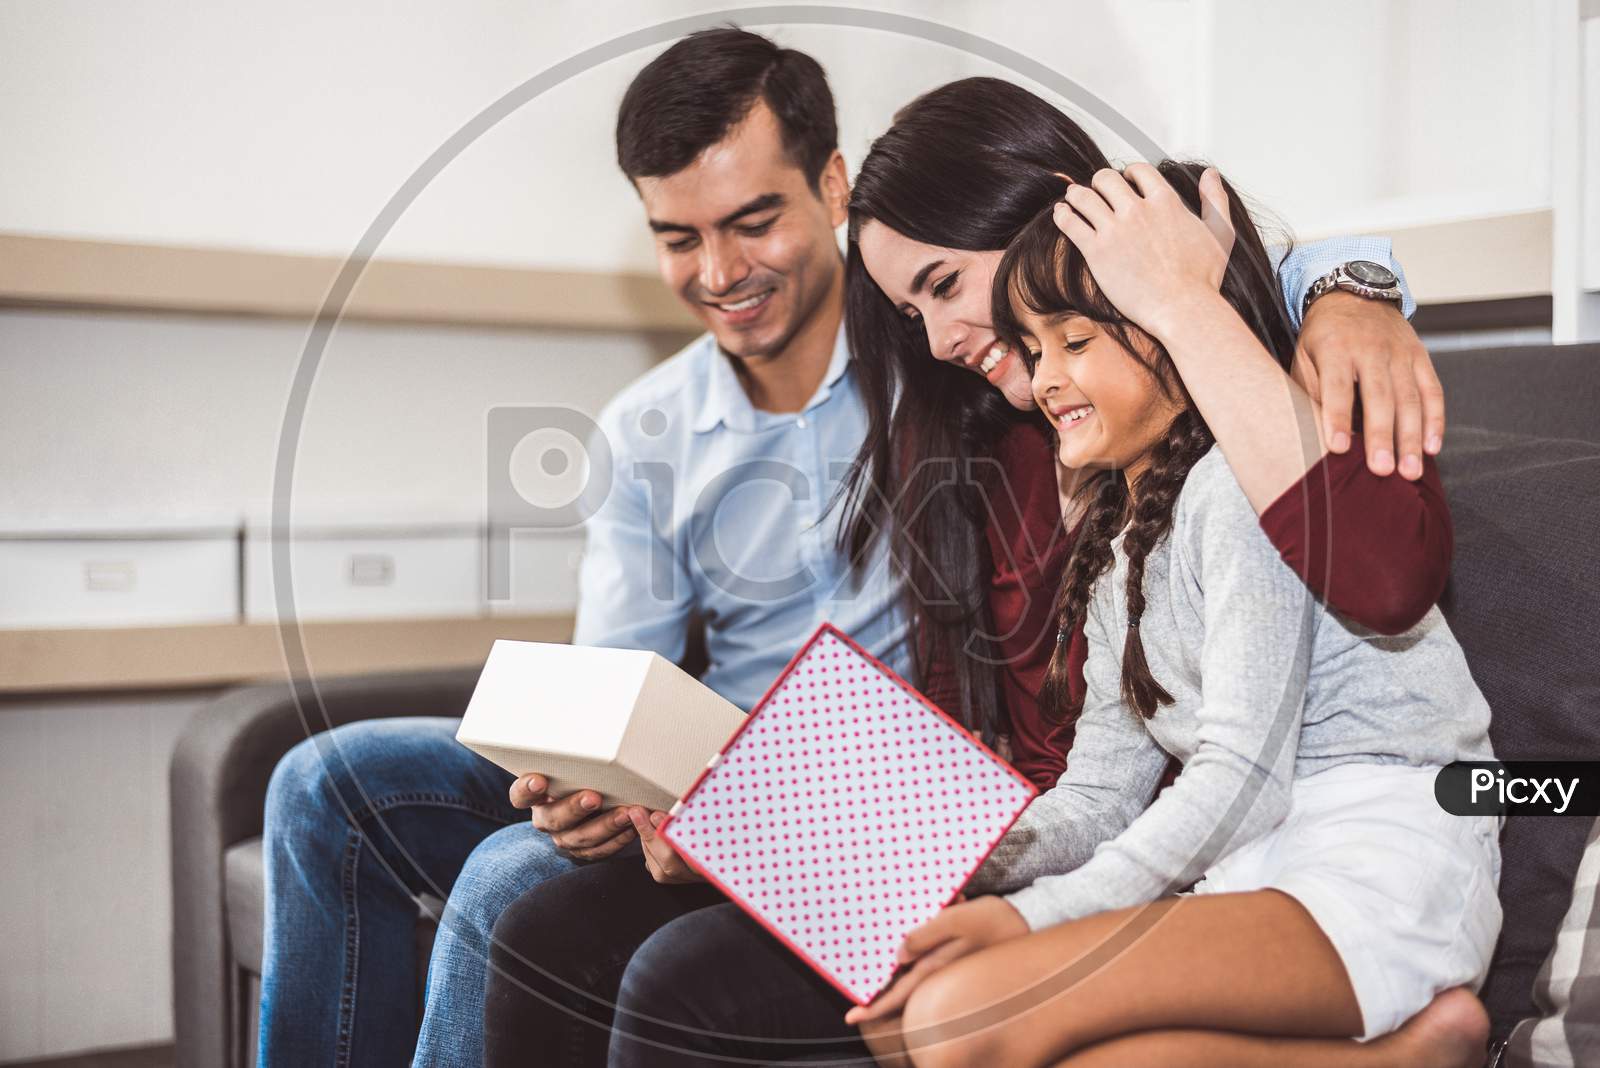 Happy Family Parents And Little Girl Looking Into Gift Box In Christmas And New Year Day On Sofa In Living Room. Xmas Present For Surprised Good Children In Happy Home. People And Lifestyles Concept.